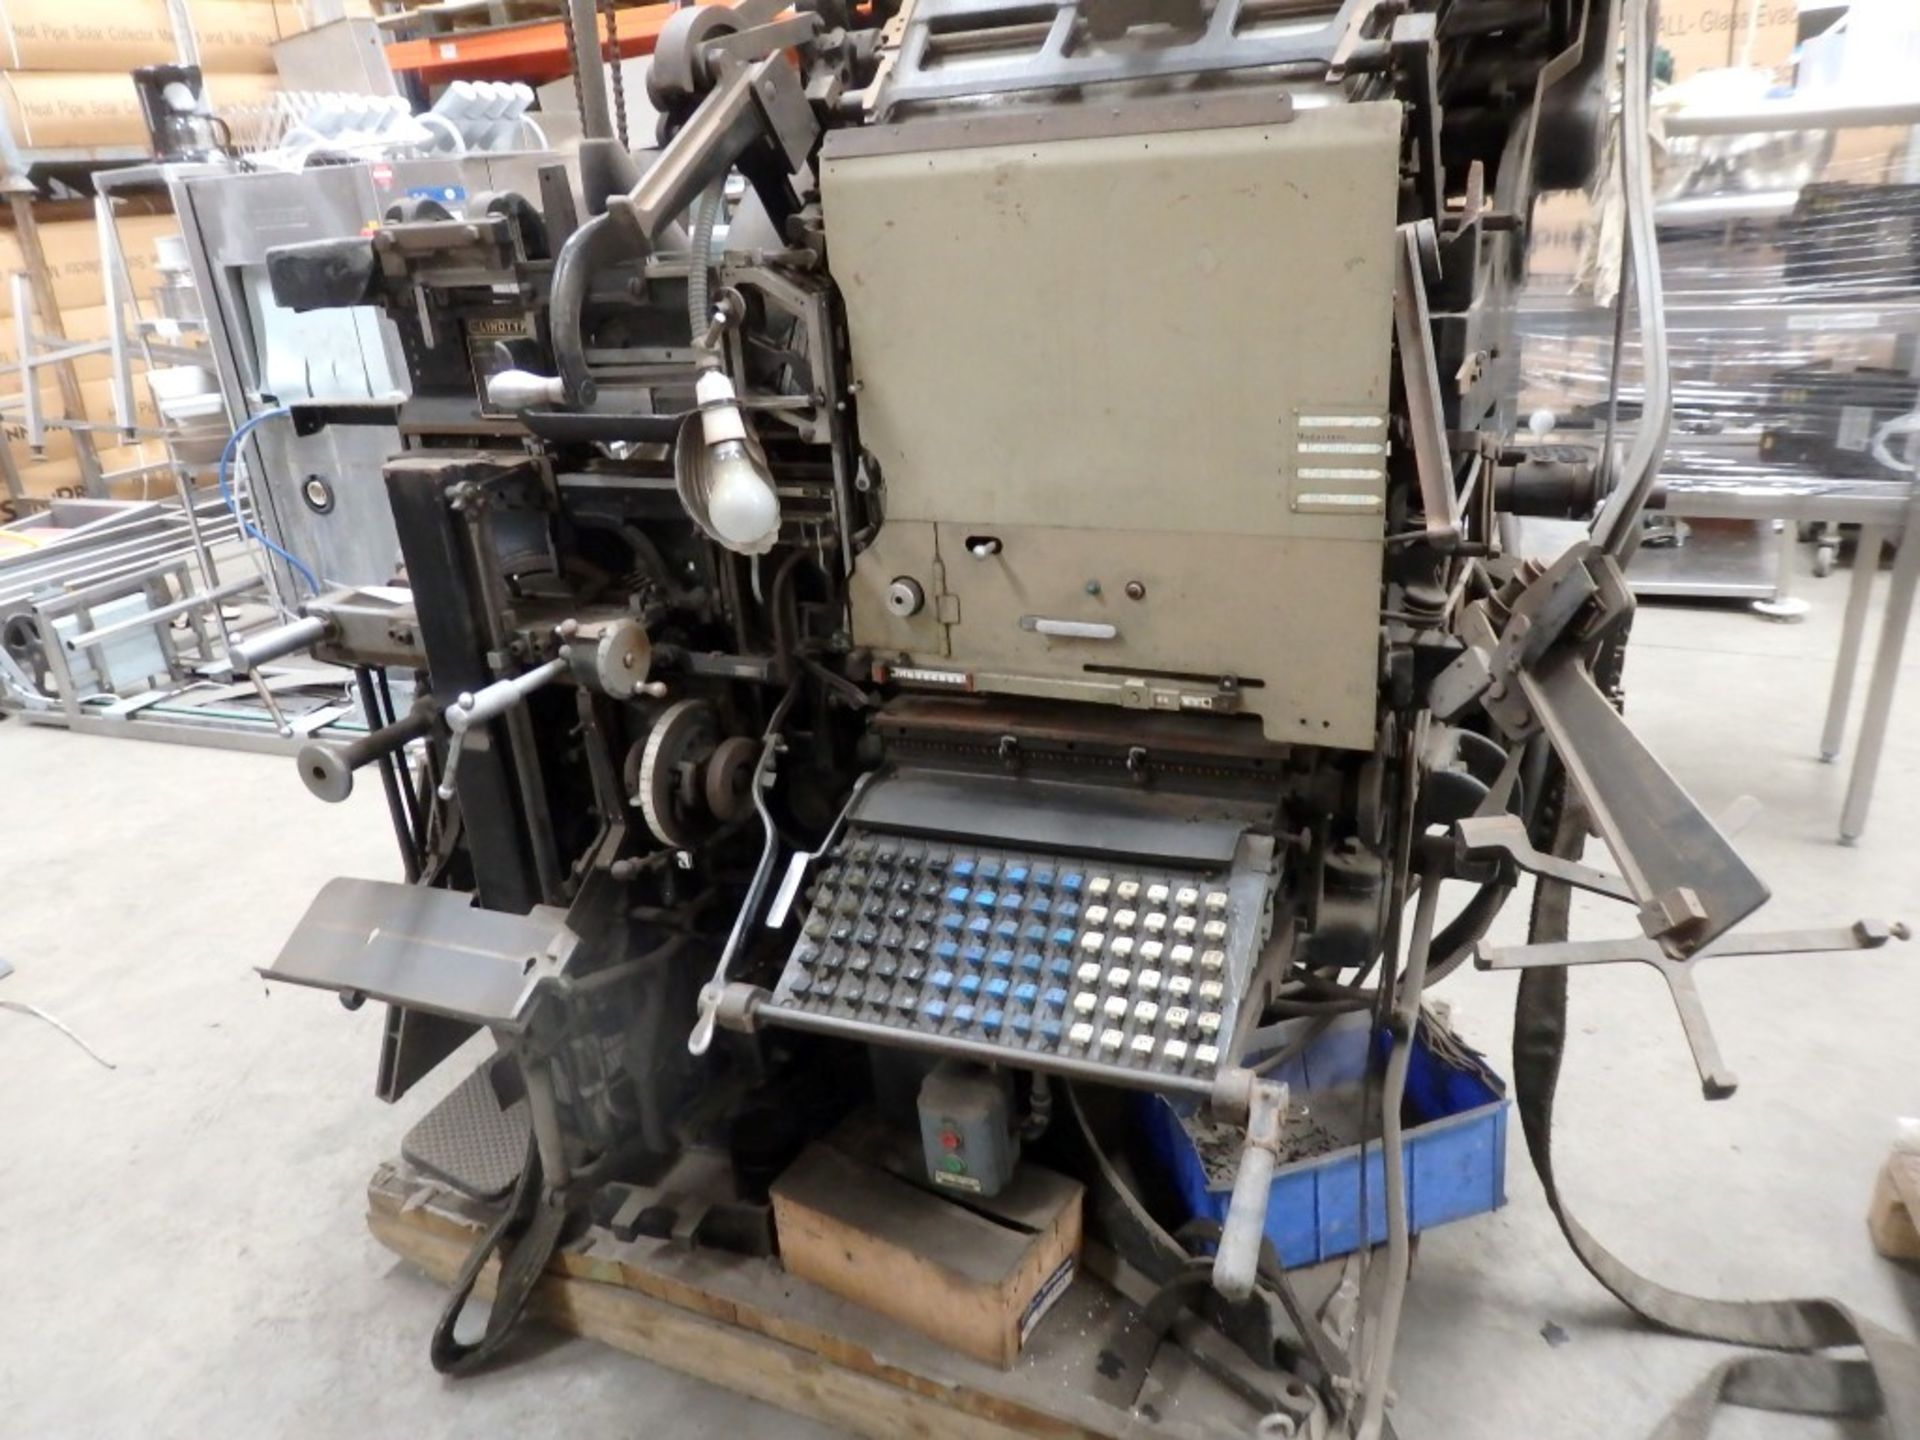 1 x Original Linotype Model 78 Printing Press - Untested In Good Aesthetic Condition - Fantastic - Image 23 of 23